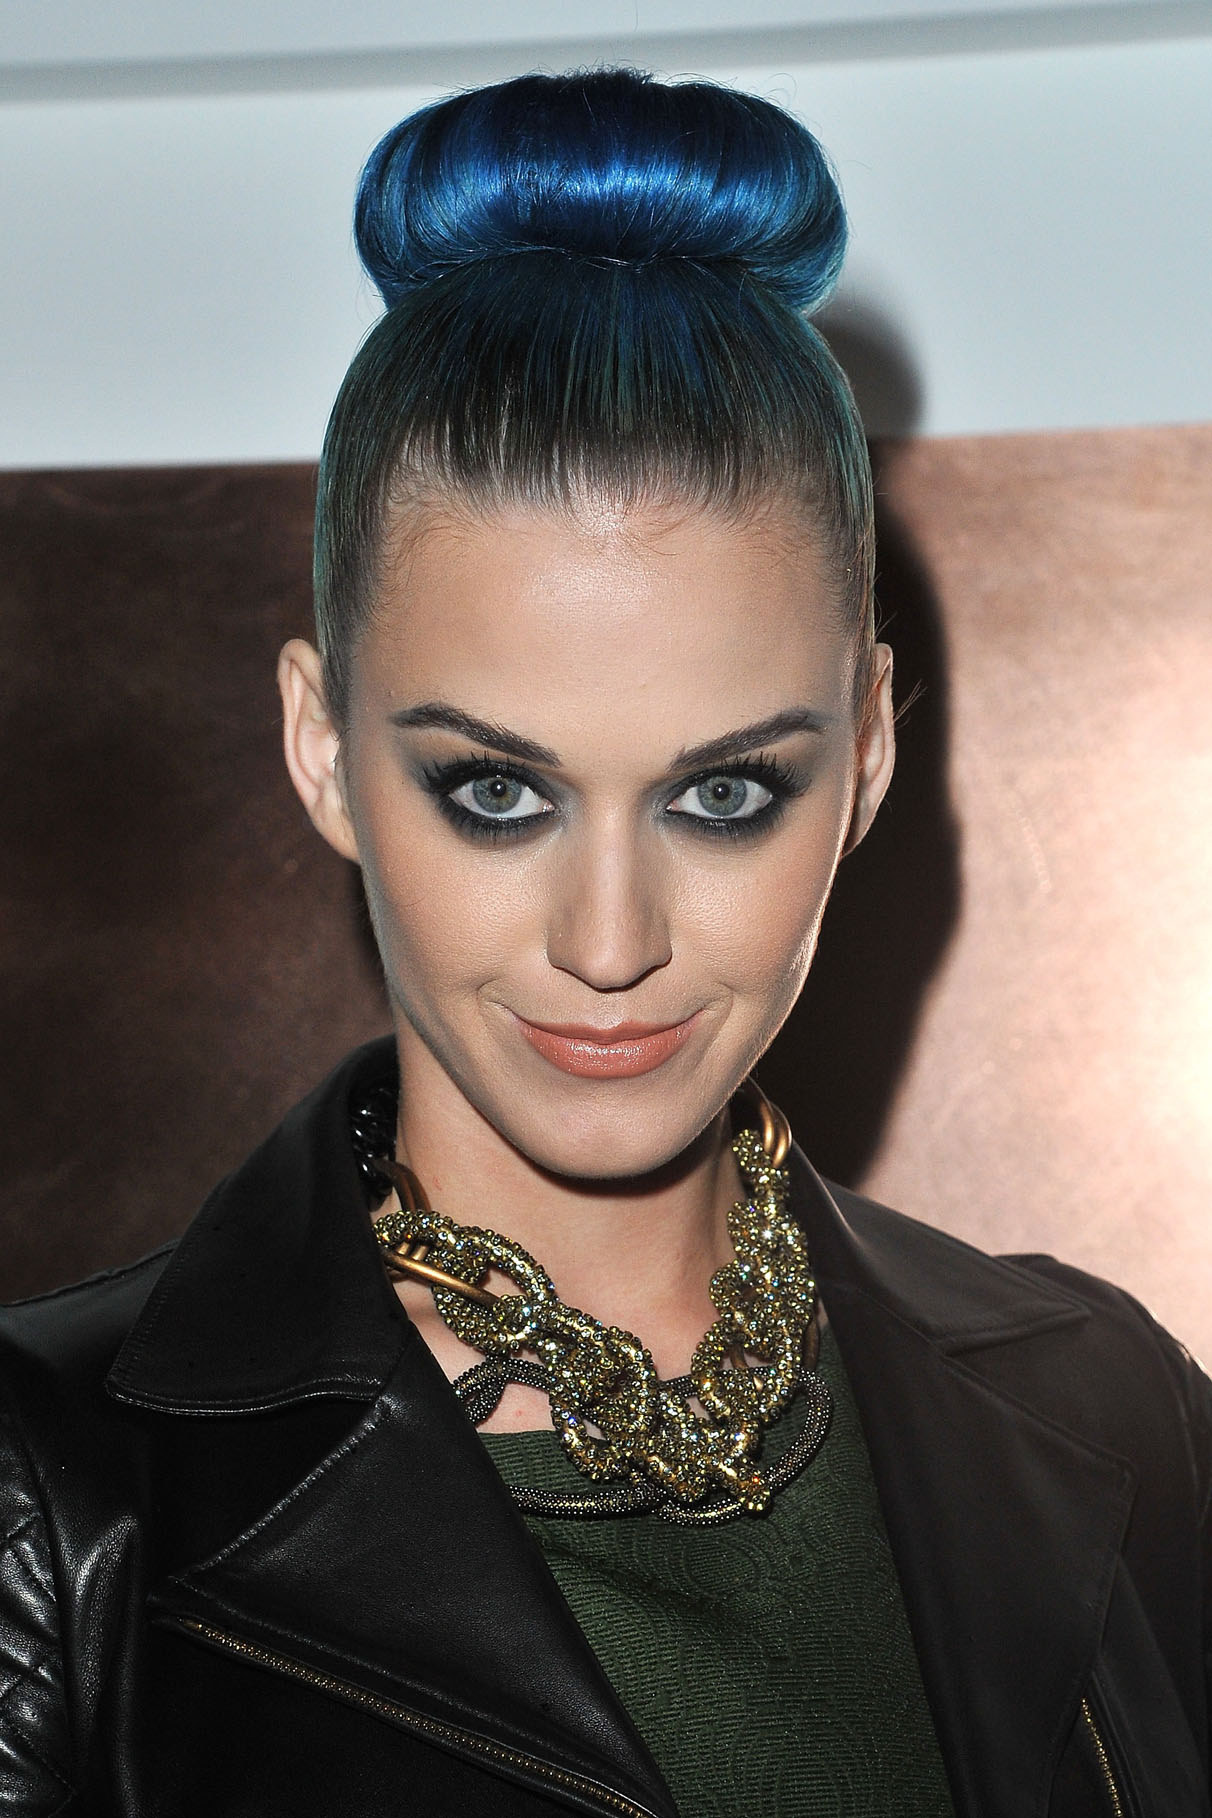 15+ Hottest Singer Katy Perry Pictures 2012 - SheClick.com